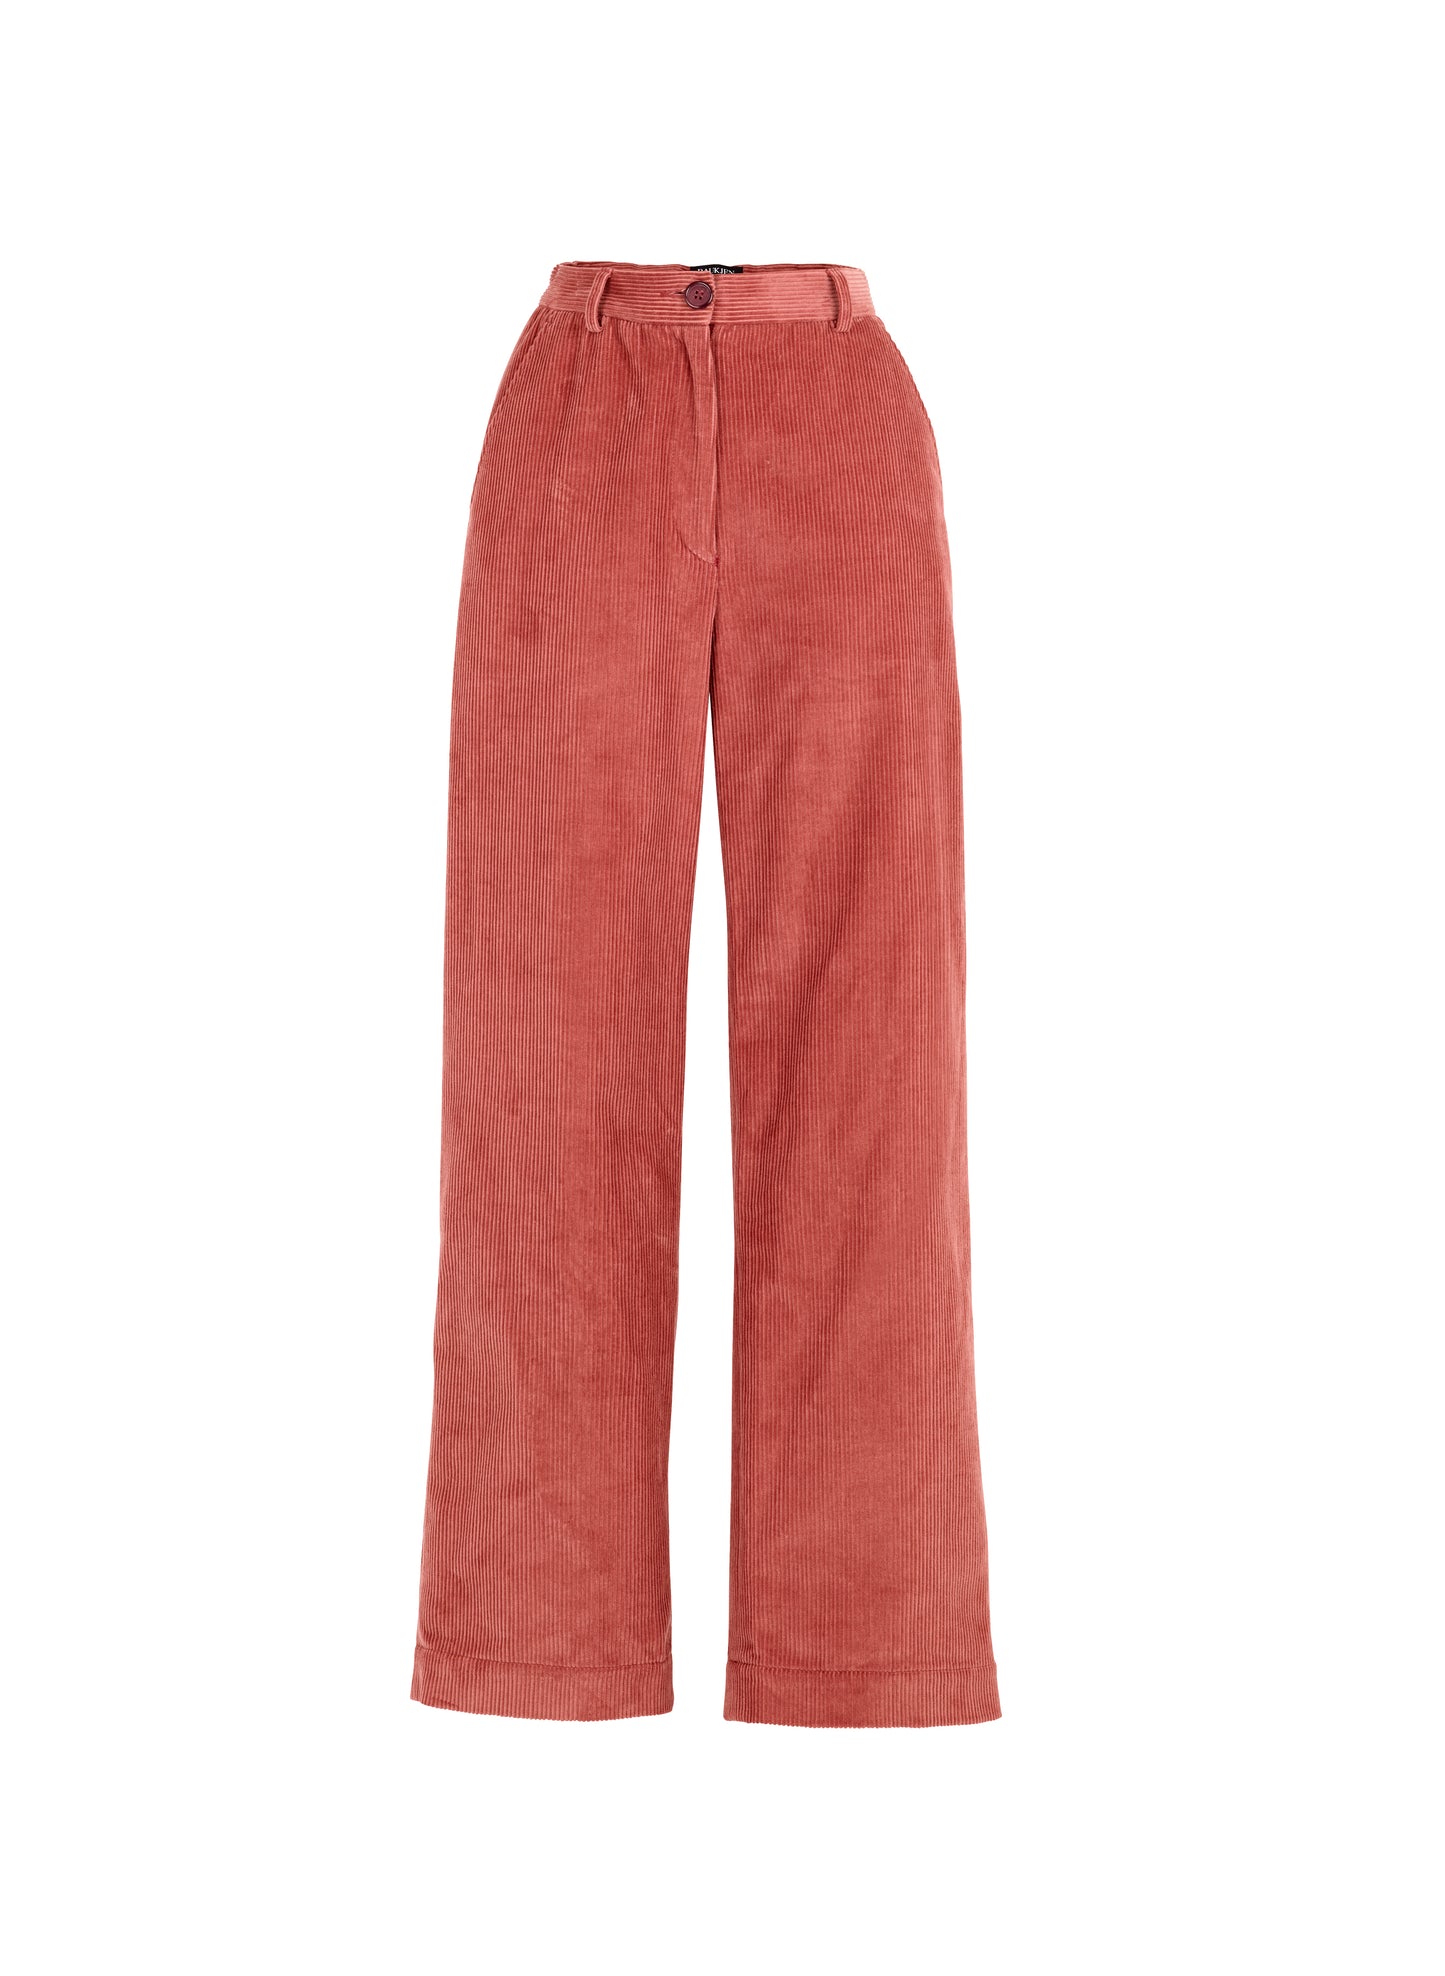 Pre-Loved Nadia BCI Cotton Trouser